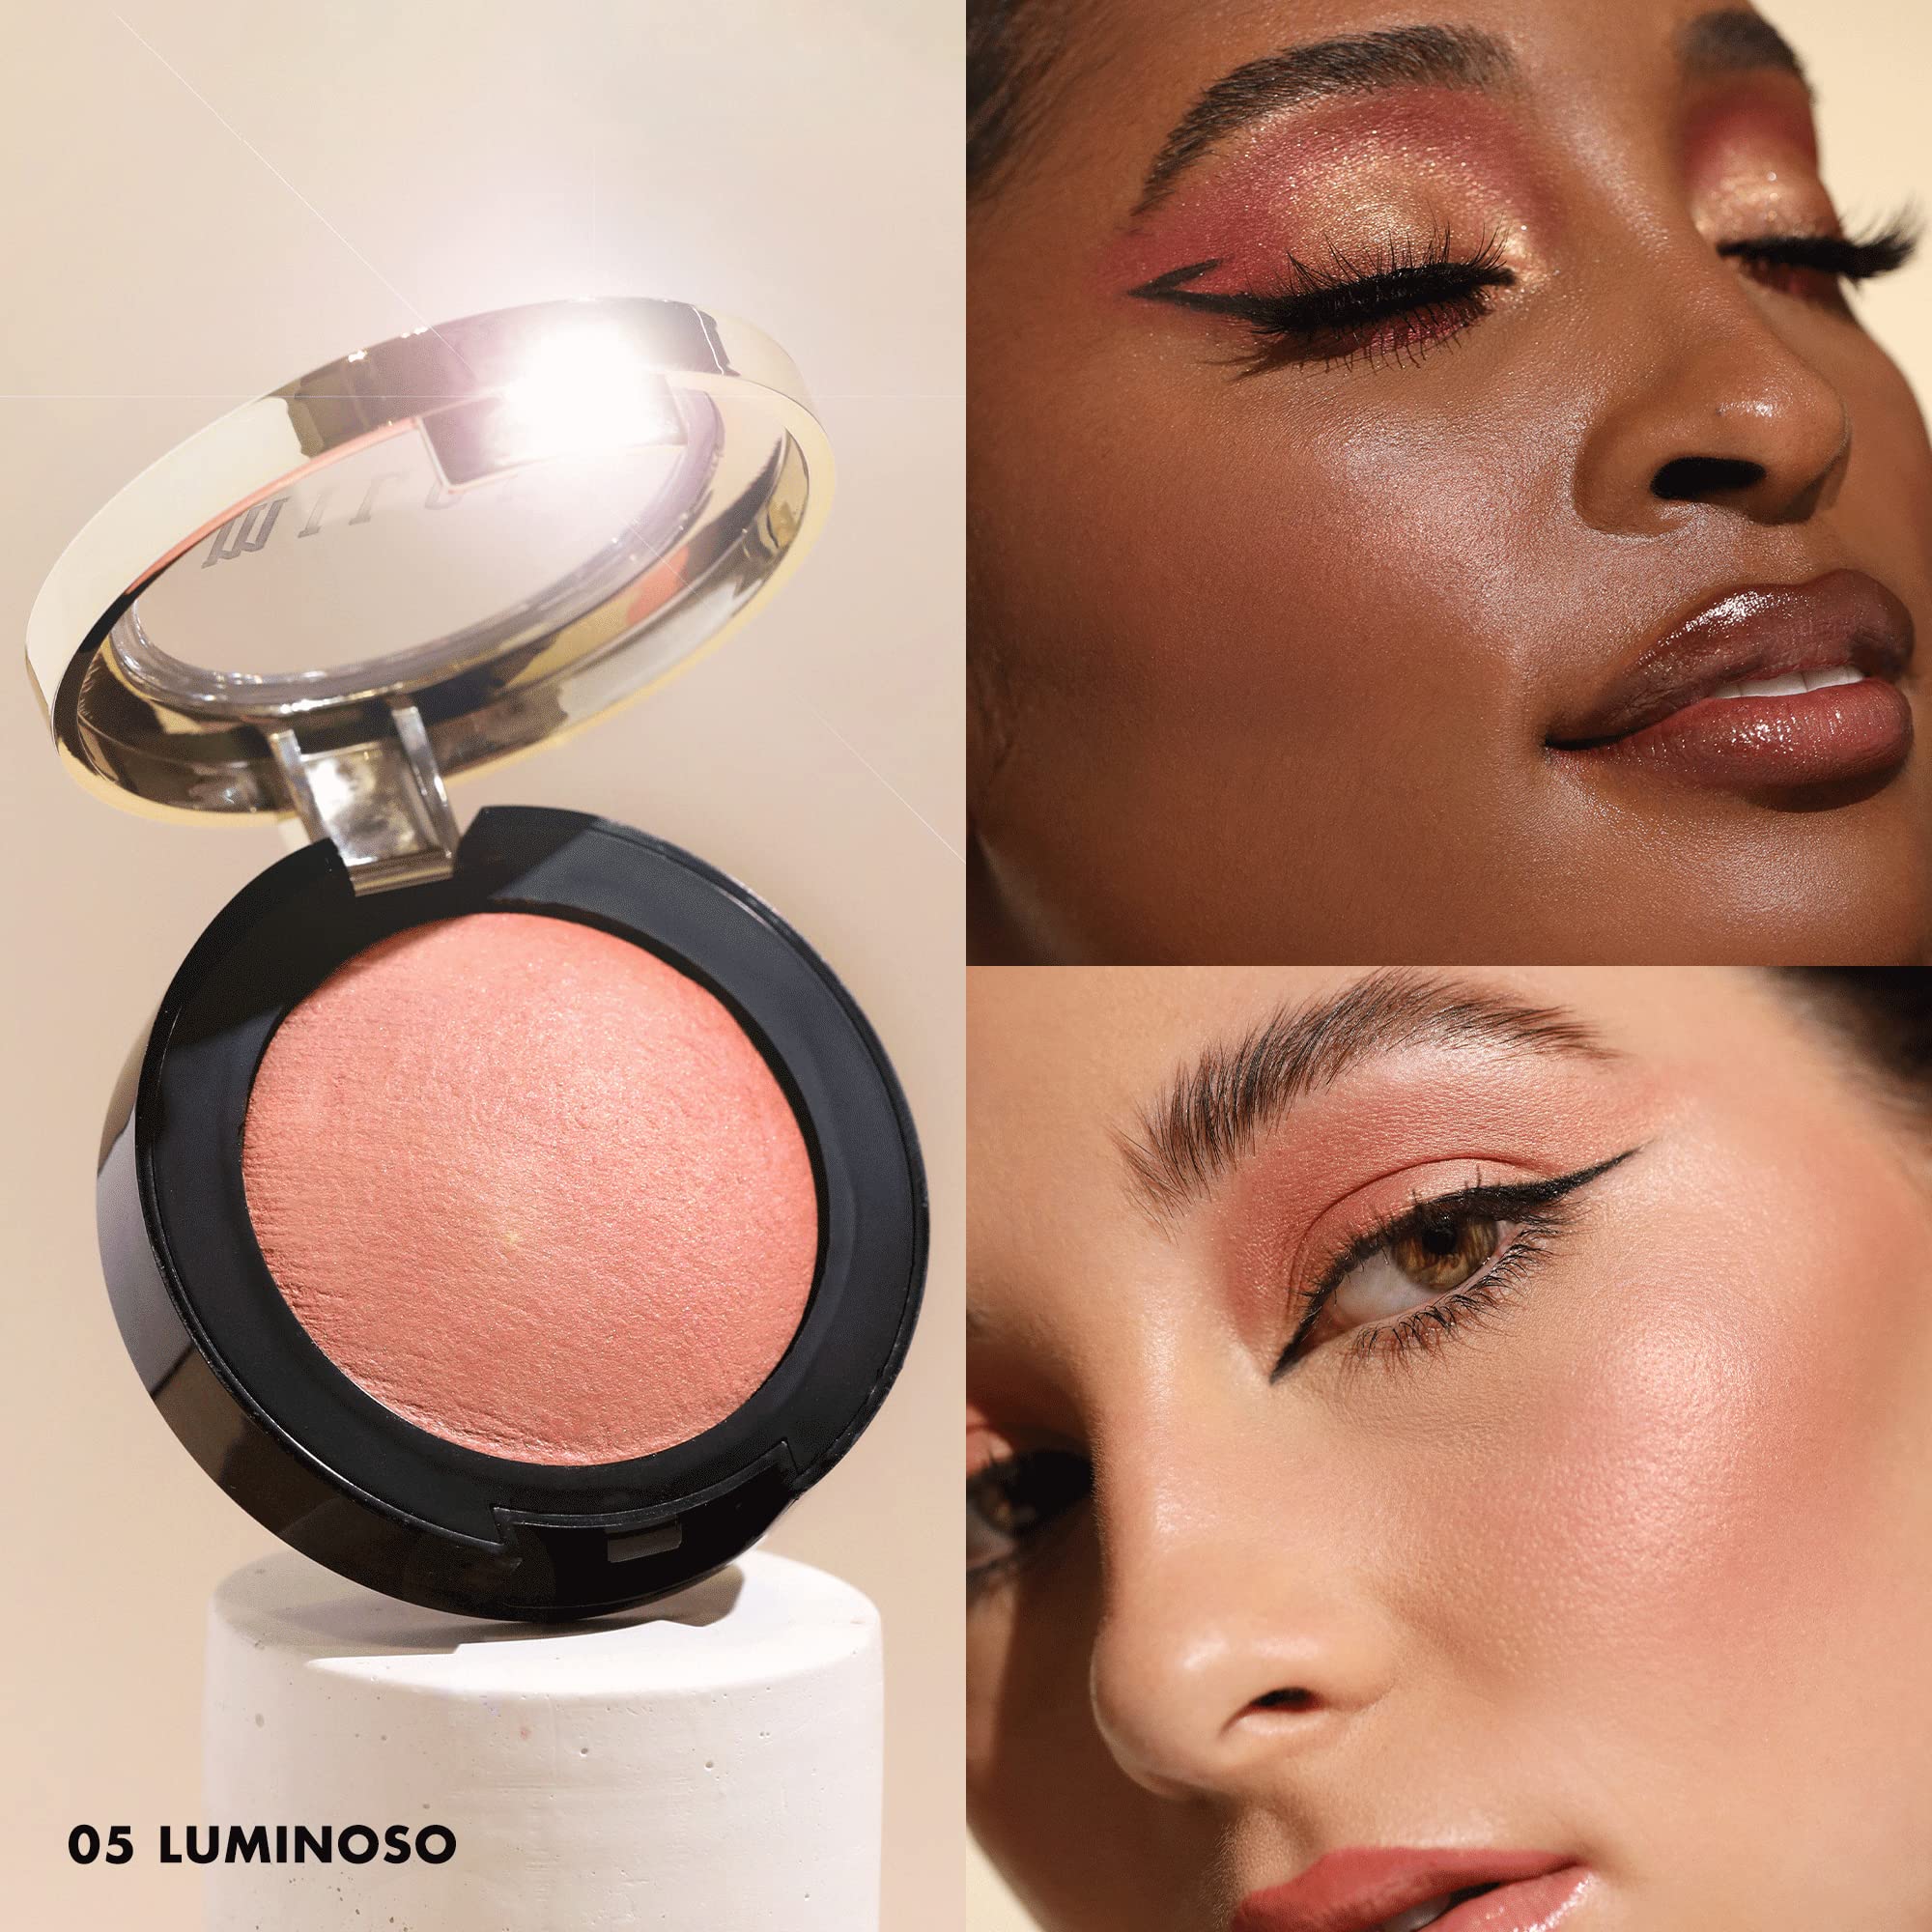 Milani Baked Blush - Luminoso (0.12 Ounce) Cruelty-Free Powder Blush - Shape, Contour & Highlight Face for a Shimmery or Matte Finish